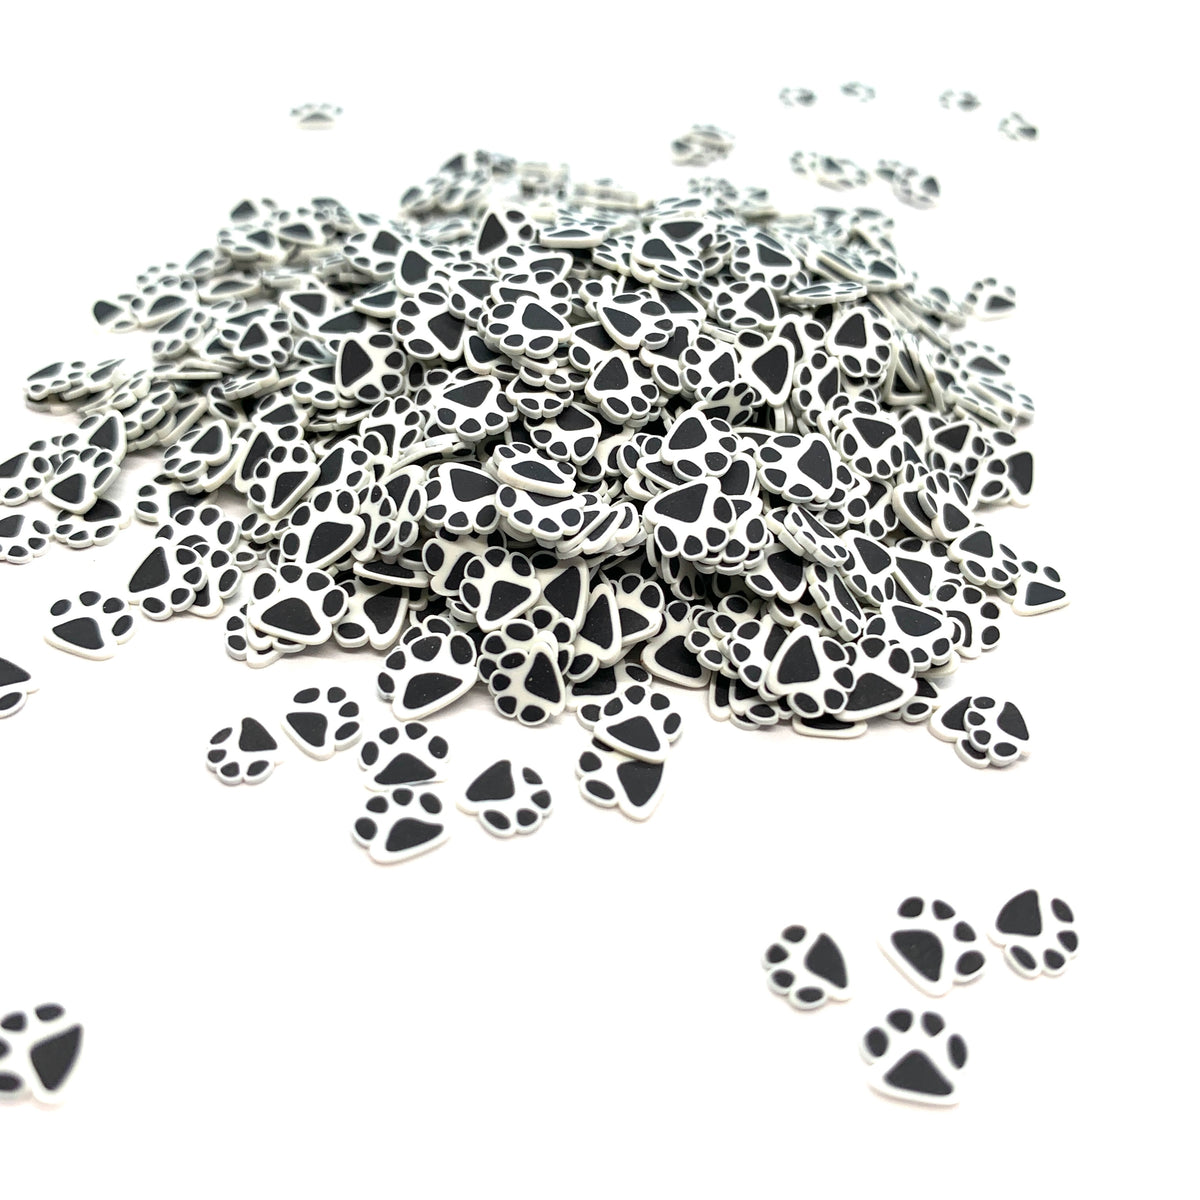 Pet Paws Polymer Clay Pieces for Epoxy and UV Resin Art - Black and White